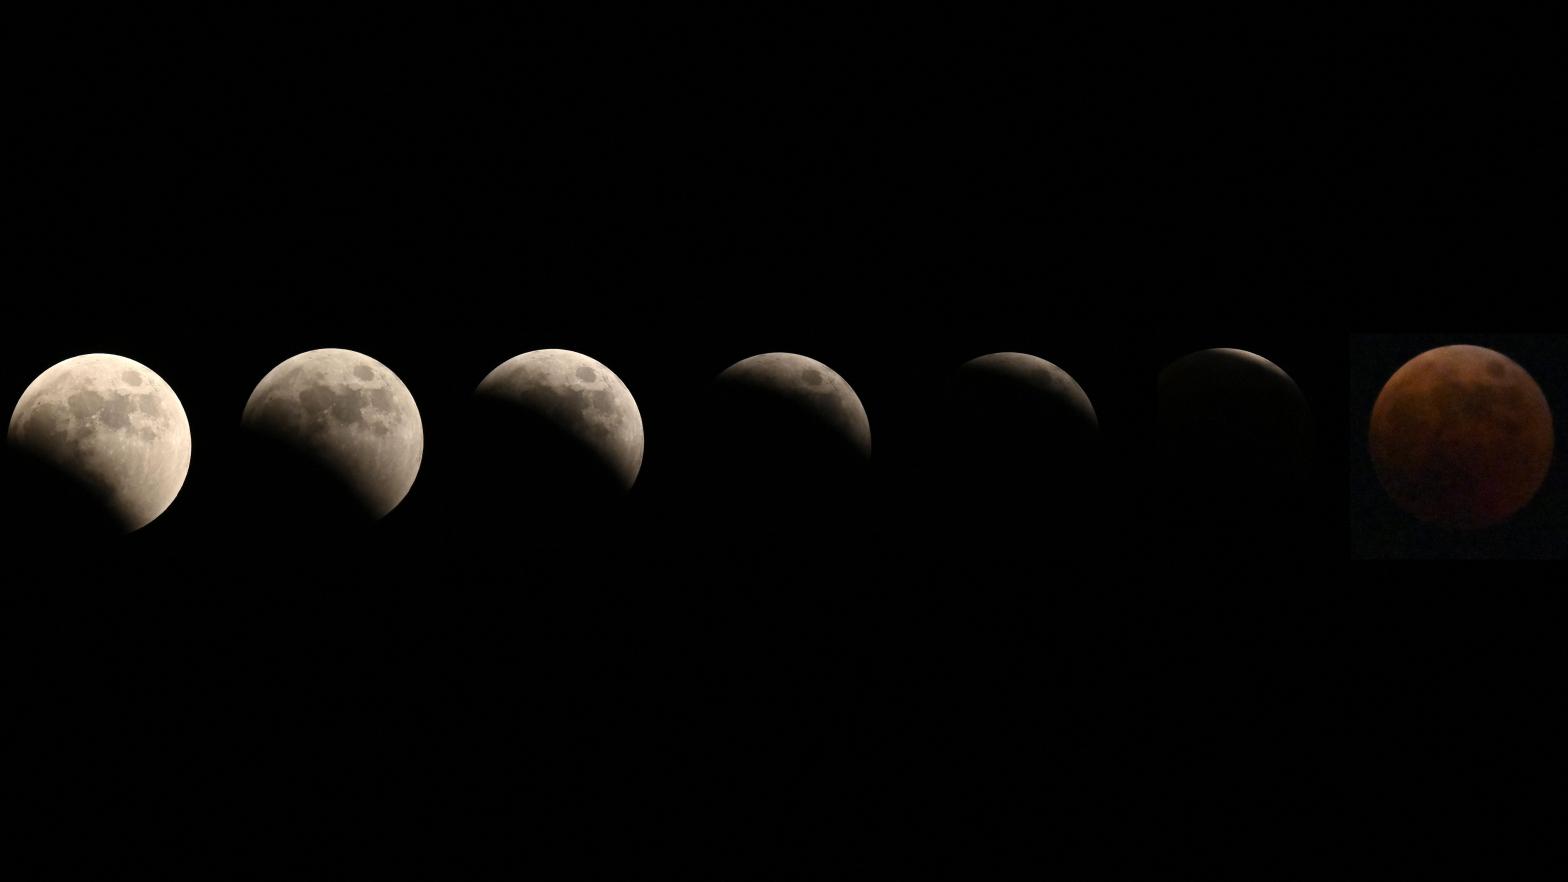 Different stages of the lunar eclipse above Tokyo, Japan combined into one image. (Image: Richard A. Brooks, Getty Images)